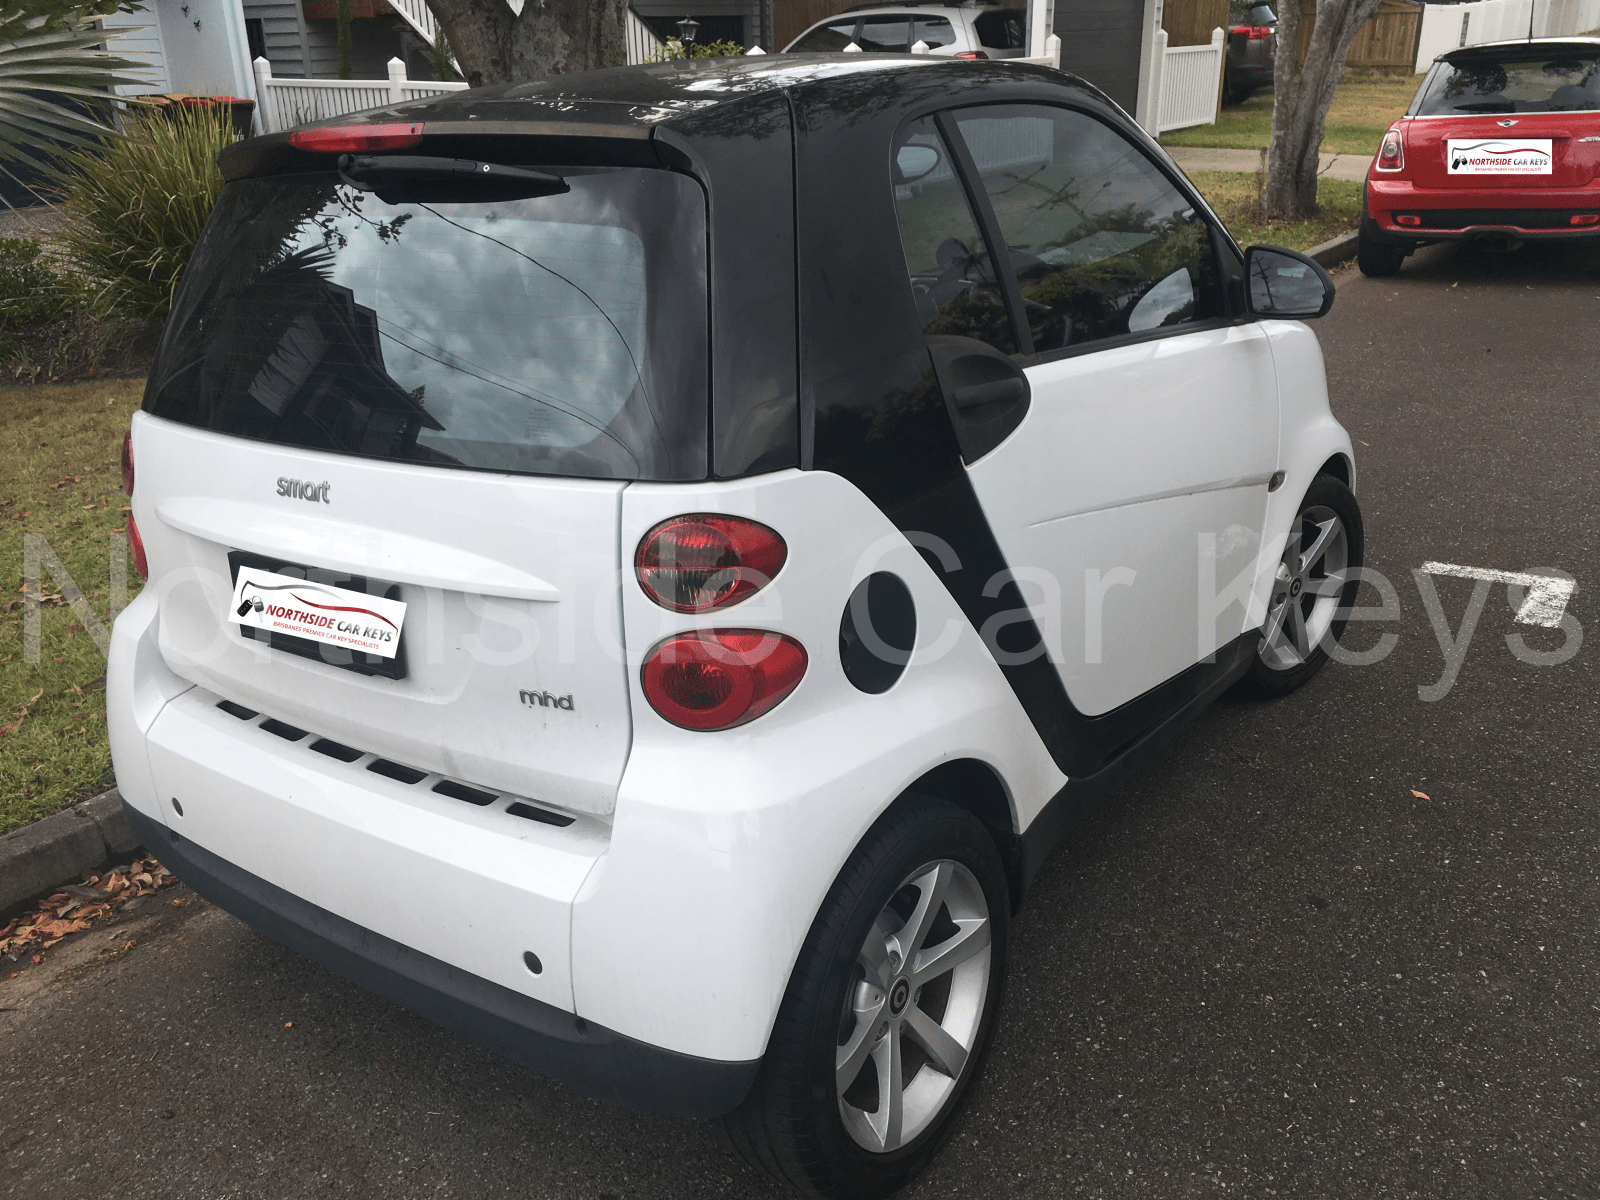 2009 SMARTCAR FORTWO COUPE rear view